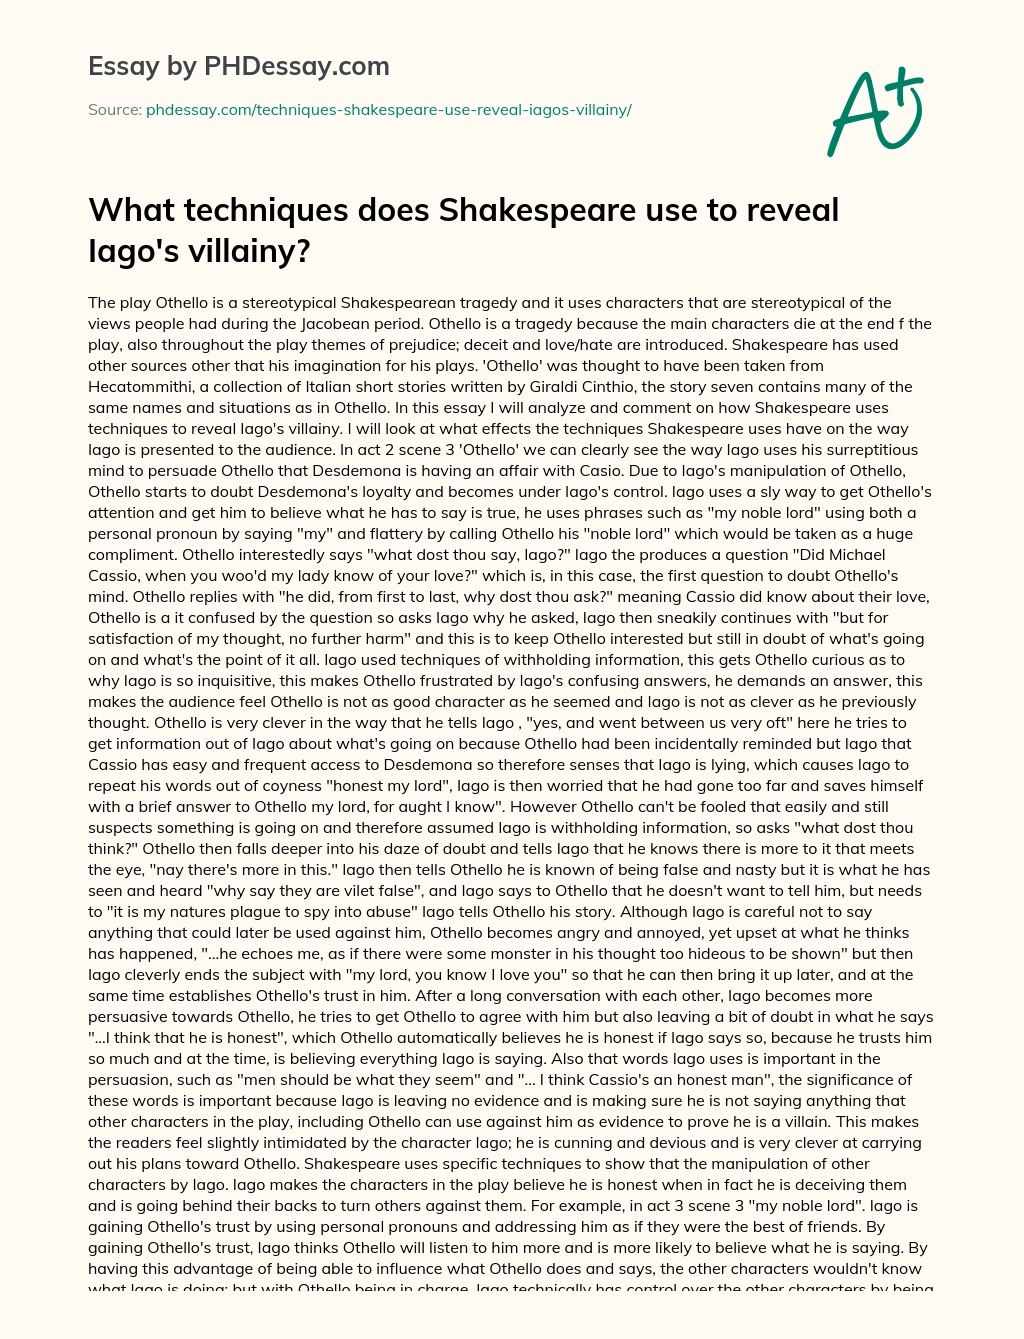 What techniques does Shakespeare use to reveal Iago’s villainy? essay